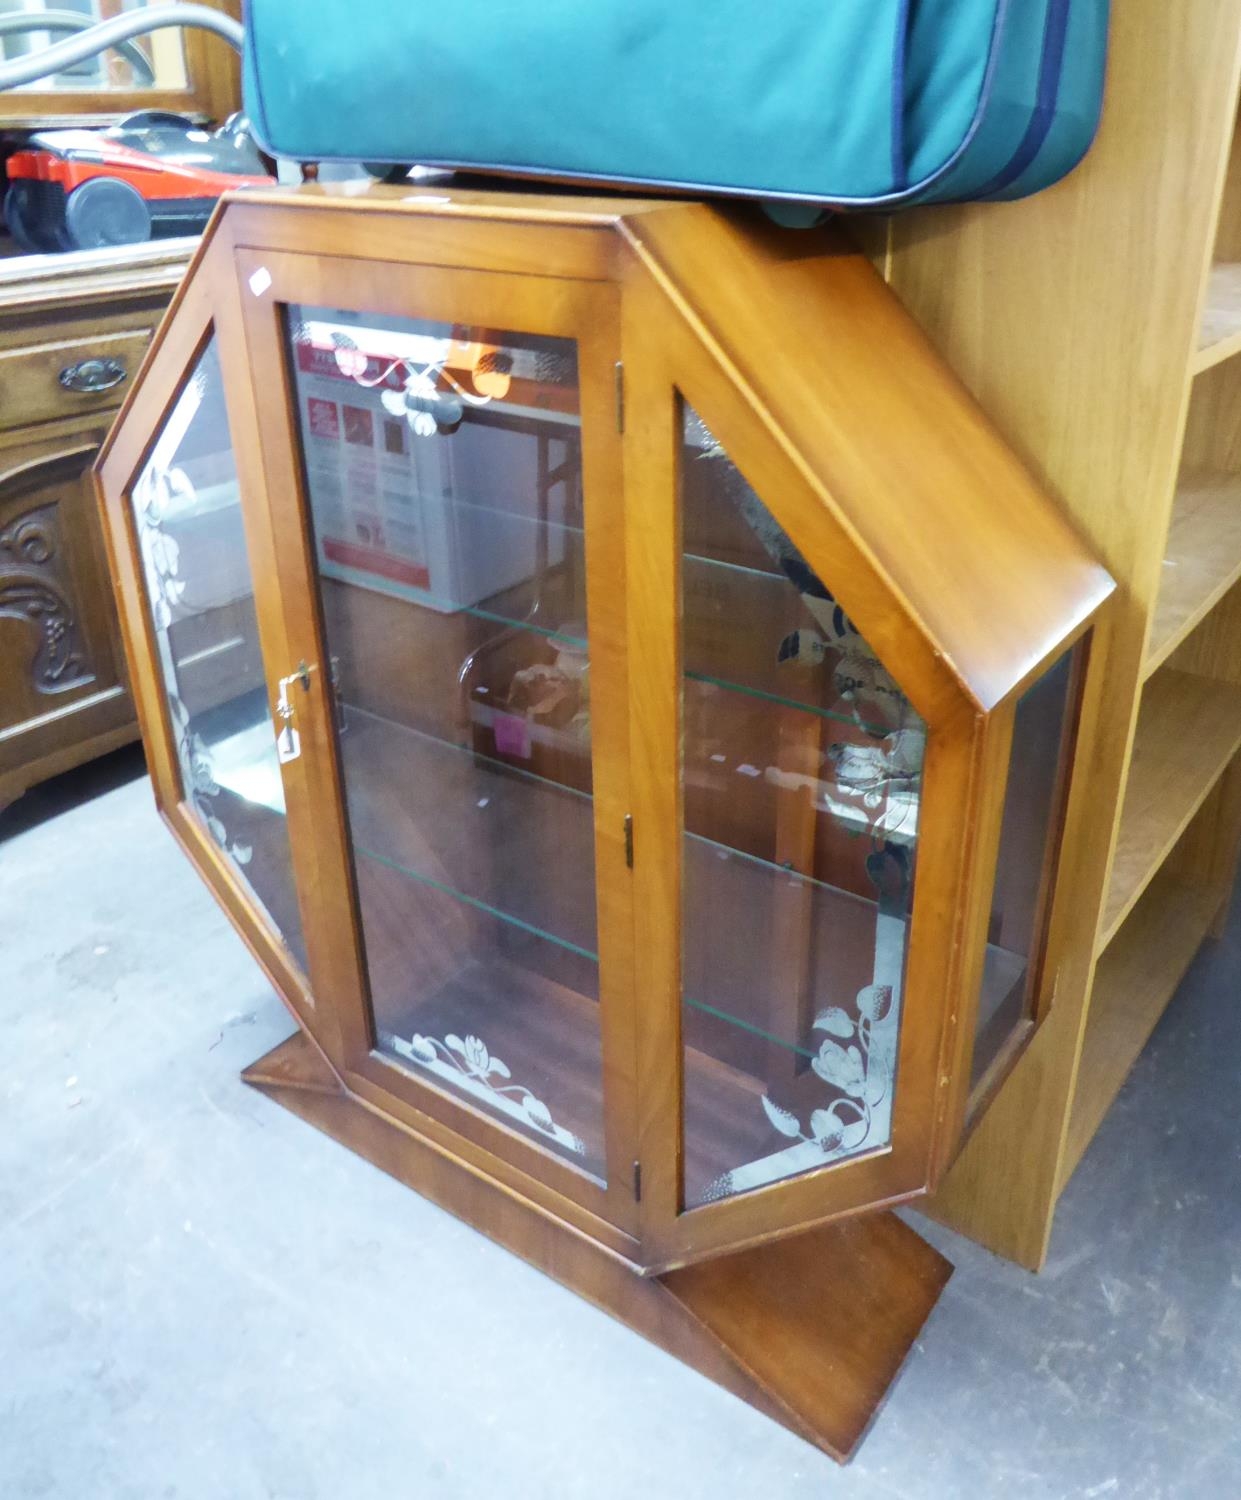 A GOOD QUALITY ART DECO WALNUTWOOD DISPLAY CABINET WITH FABULOUS OCTAGONAL SHAPE AND GLASS